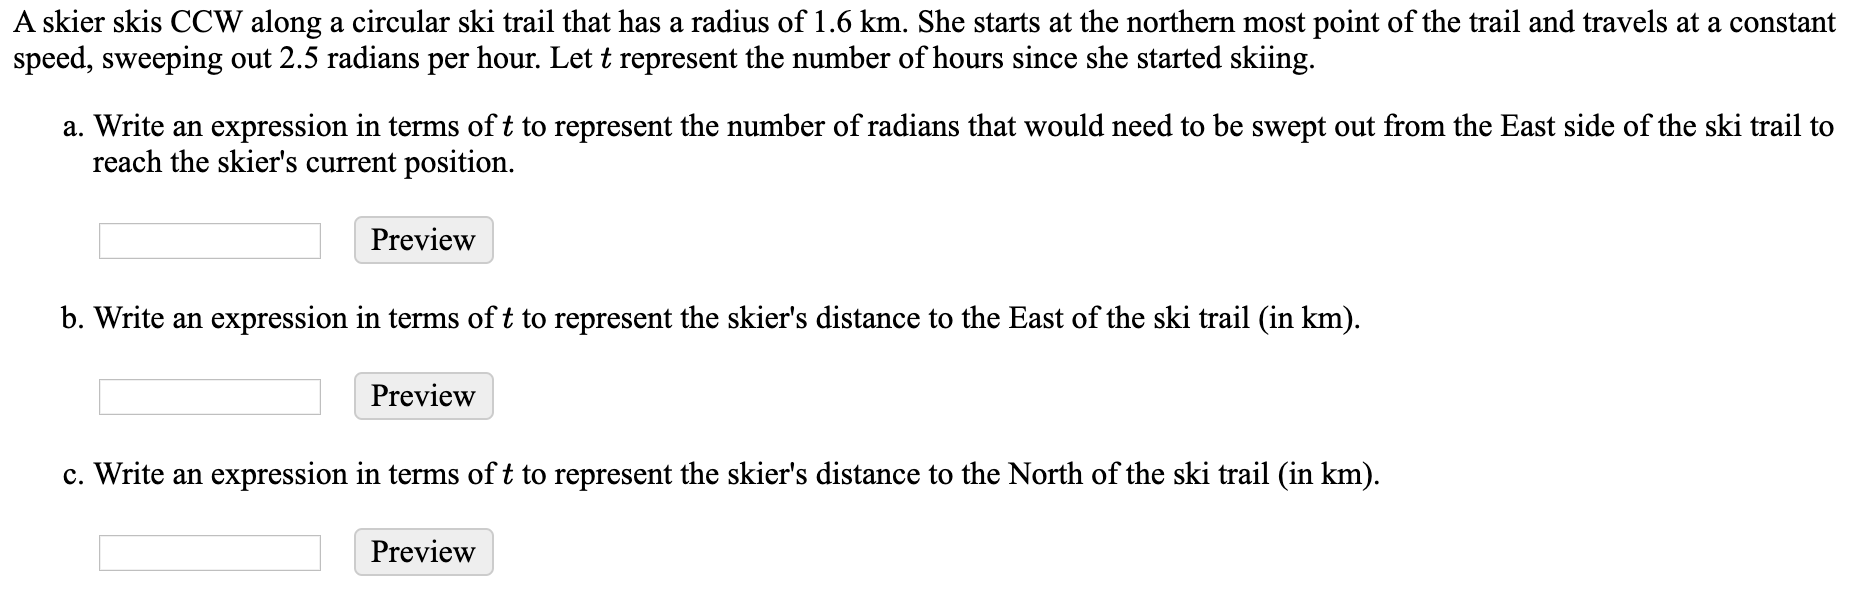 A skier skis CCW along a circular ski trail that has a radius of 1.6 km. She starts at the northern most point of the trail and travels at a constant
speed, sweeping out 2.5 radians per hour. Let t represent the number of hours since she started skiing.
a. Write an expression in terms of t to represent the number of radians that would need to be swept out from the East side of the ski trail to
reach the skier's current position.
Preview
b. Write an expression in terms of t to represent the skier's distance to the East of the ski trail (in km).
Preview
c. Write an expression in terms of t to represent the skier's distance to the North of the ski trail (in km).
Preview
